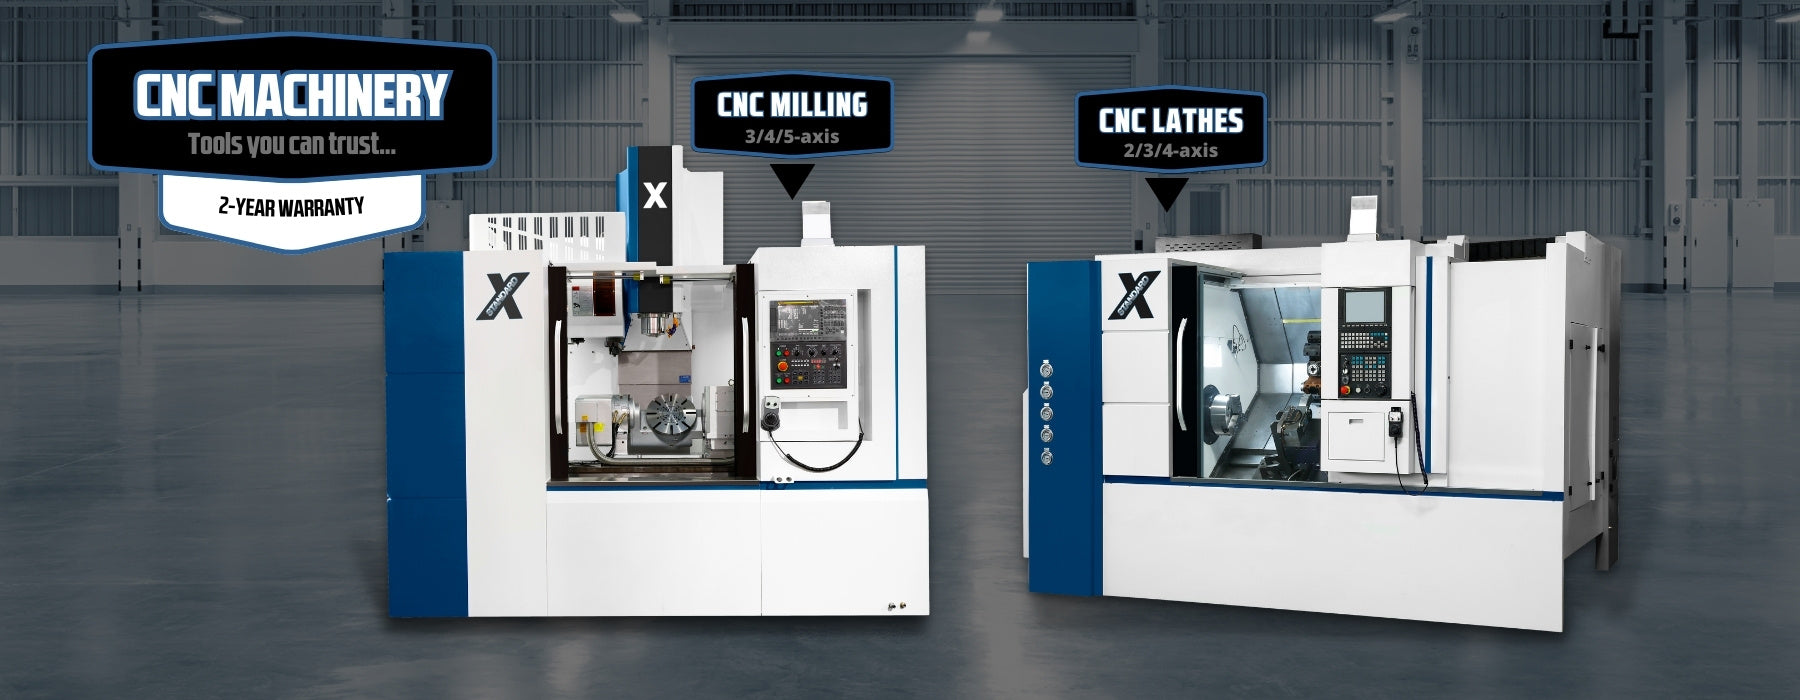 Banner for the Range of STANDARD CNC Machinery